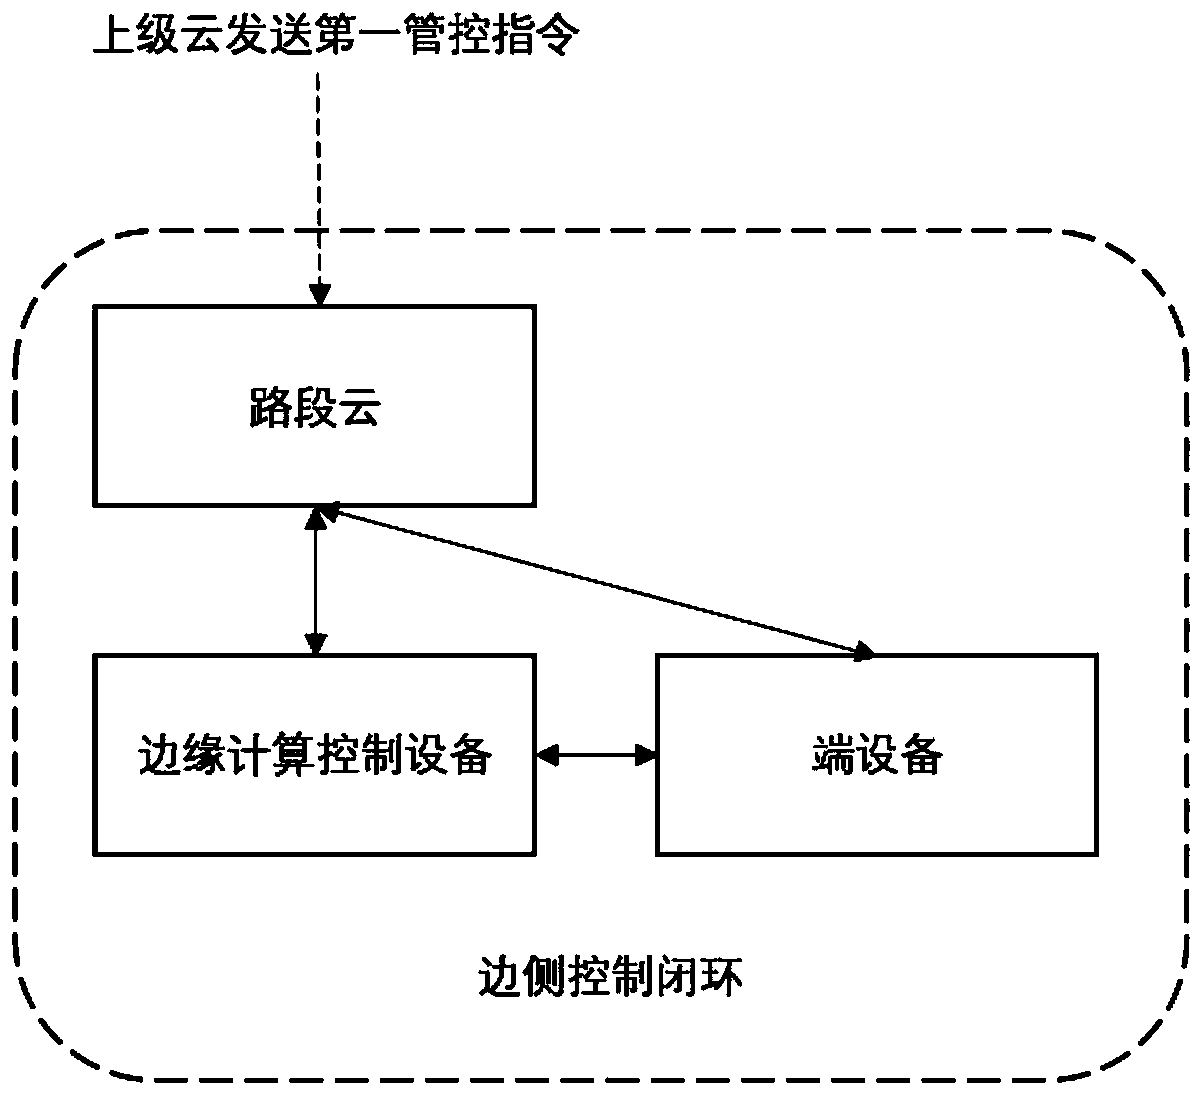 Cloud-side collaborative expressway cloud control system and control method